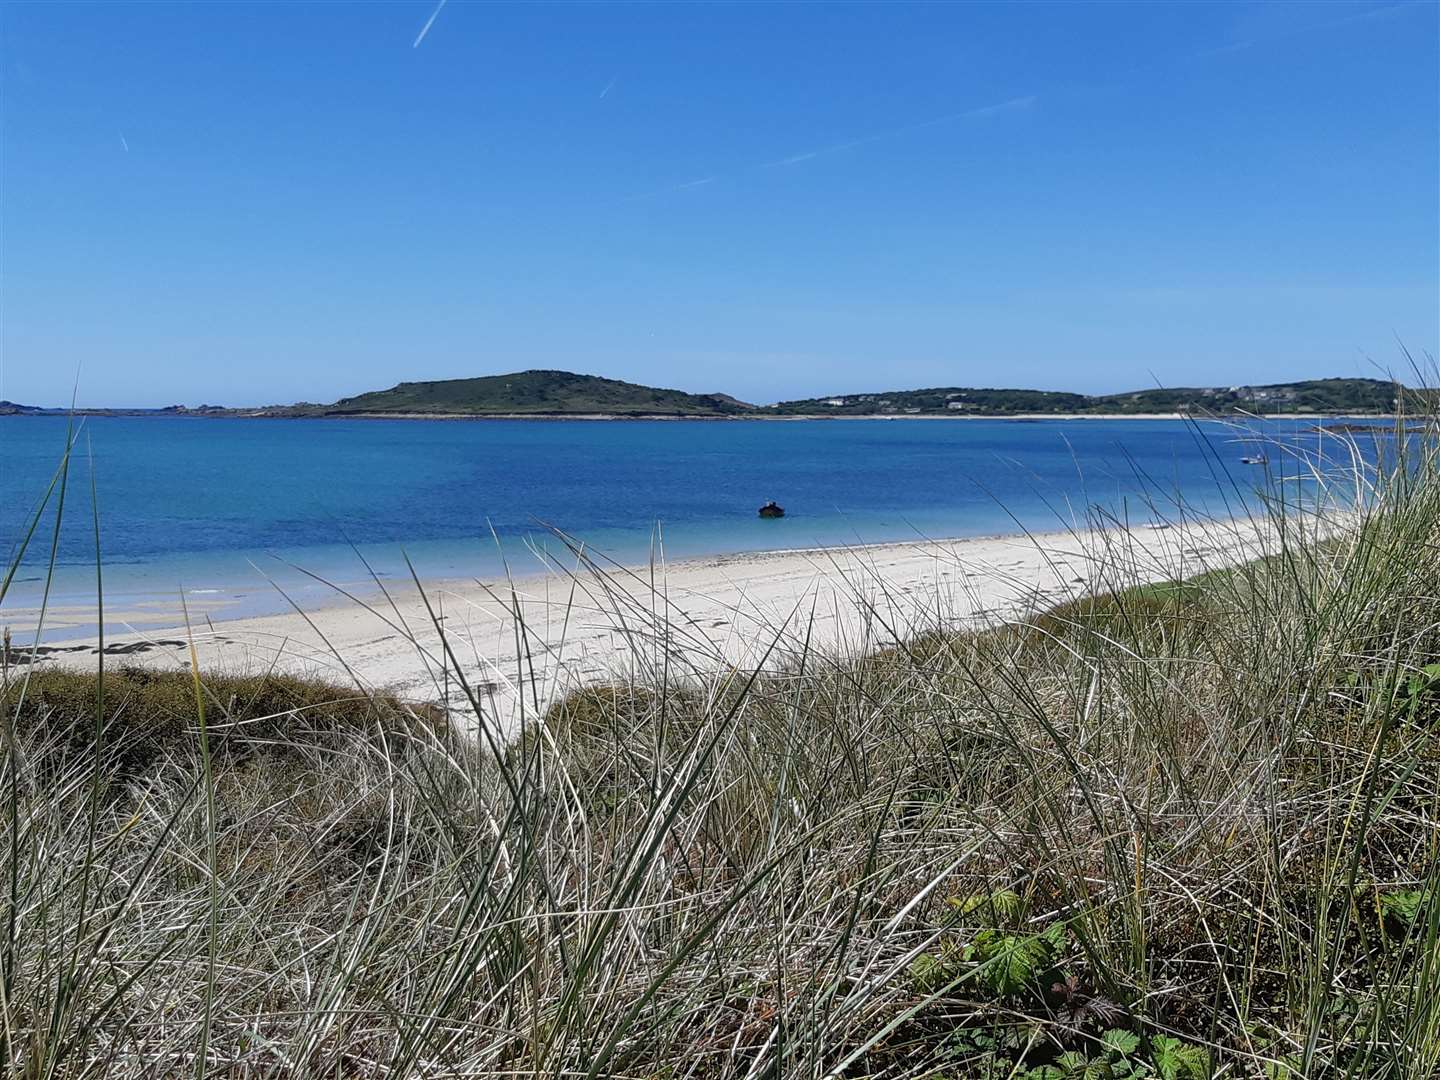 The beaches, on Tresco, Isles of Scilly are stunning